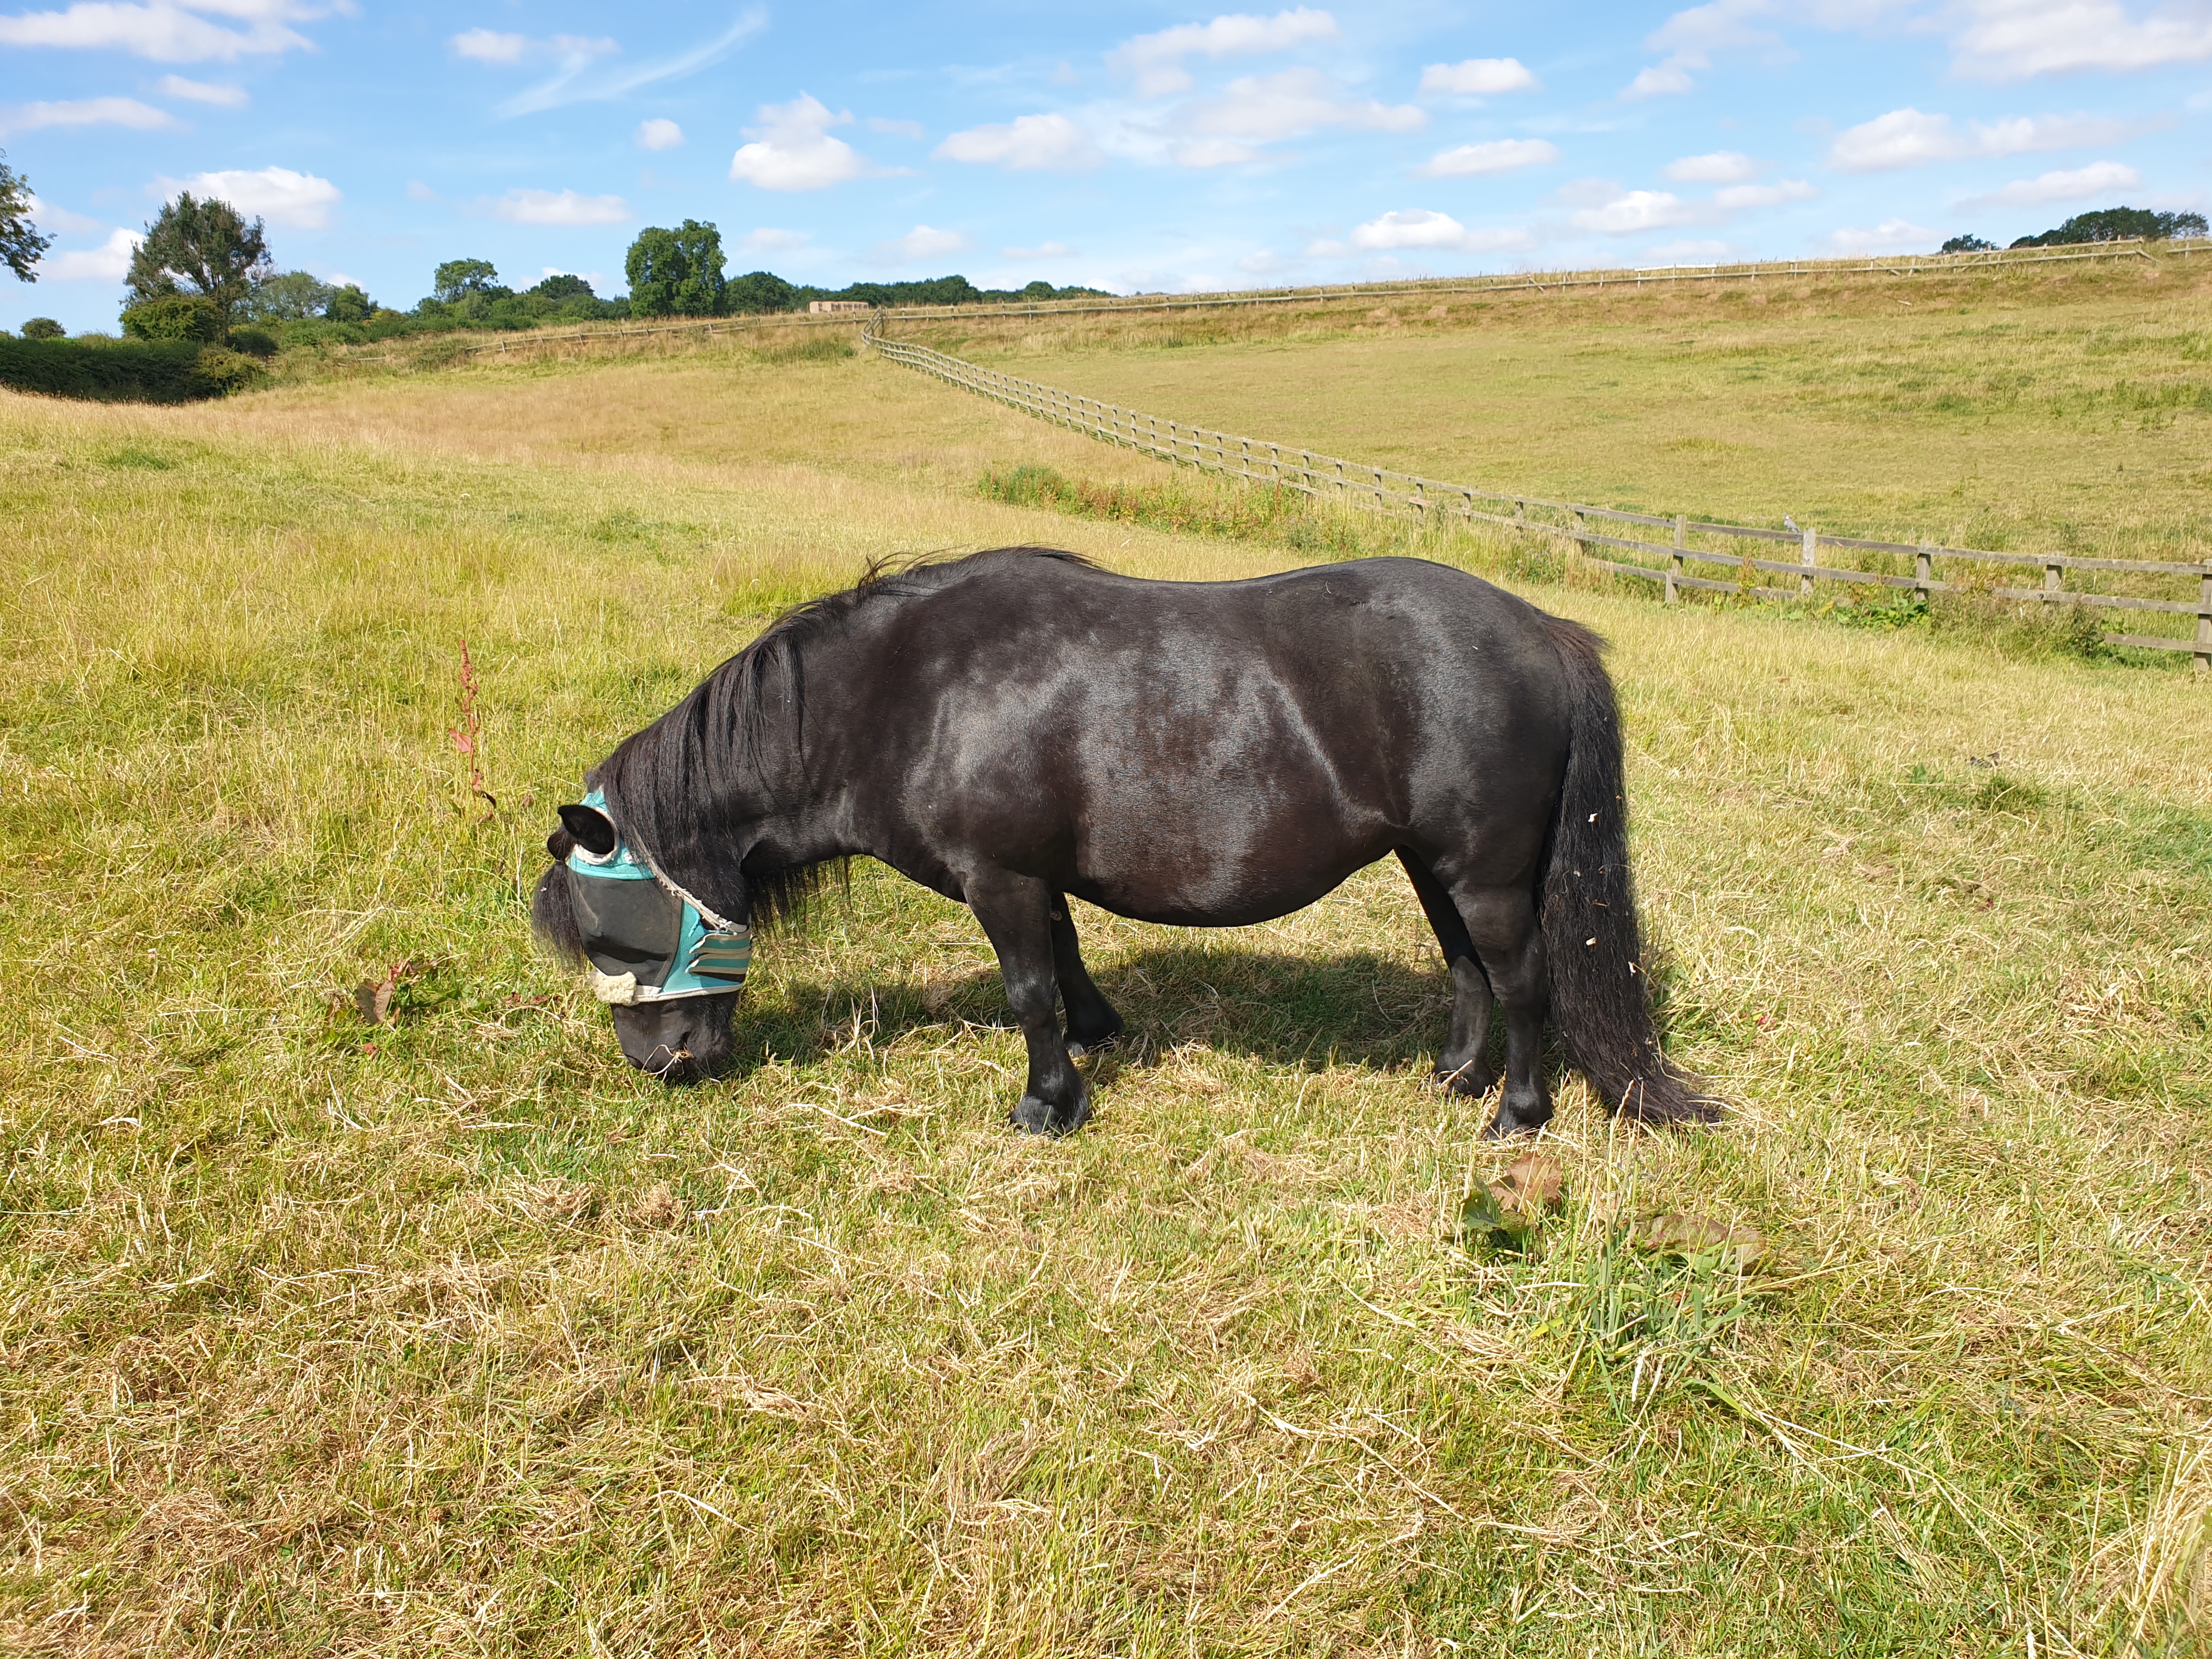 The Not-So-Secret Diary of Diva the Shetland Pony - It’s that time of year again…hair!